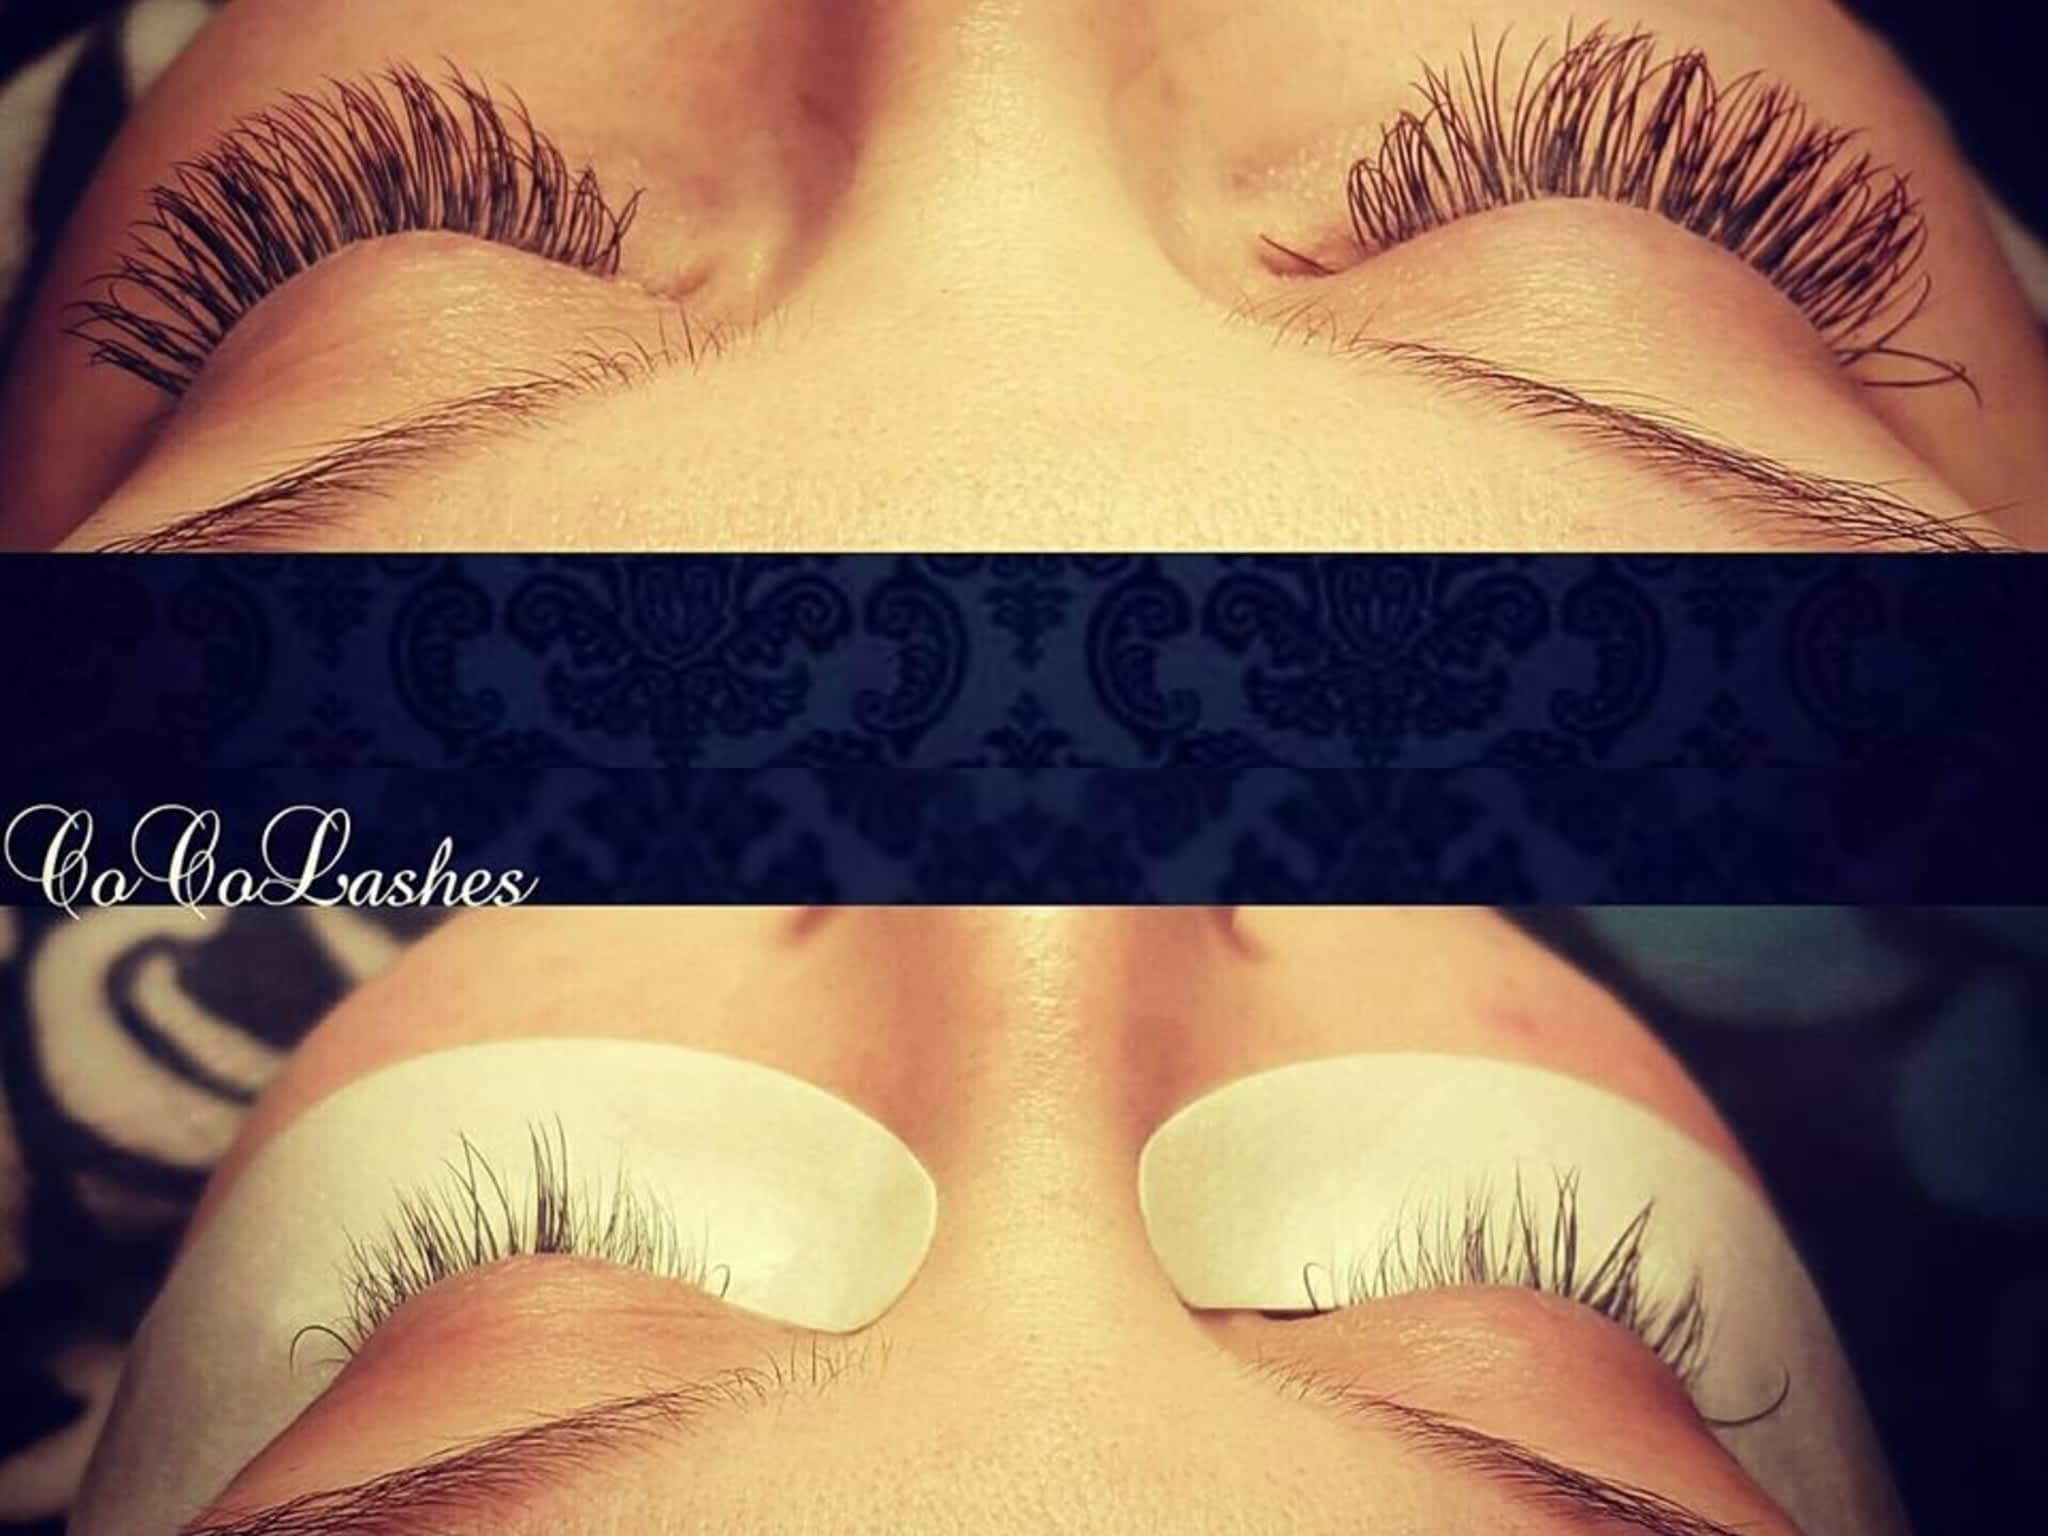 photo Lethal Lashes by CoCo Lashes